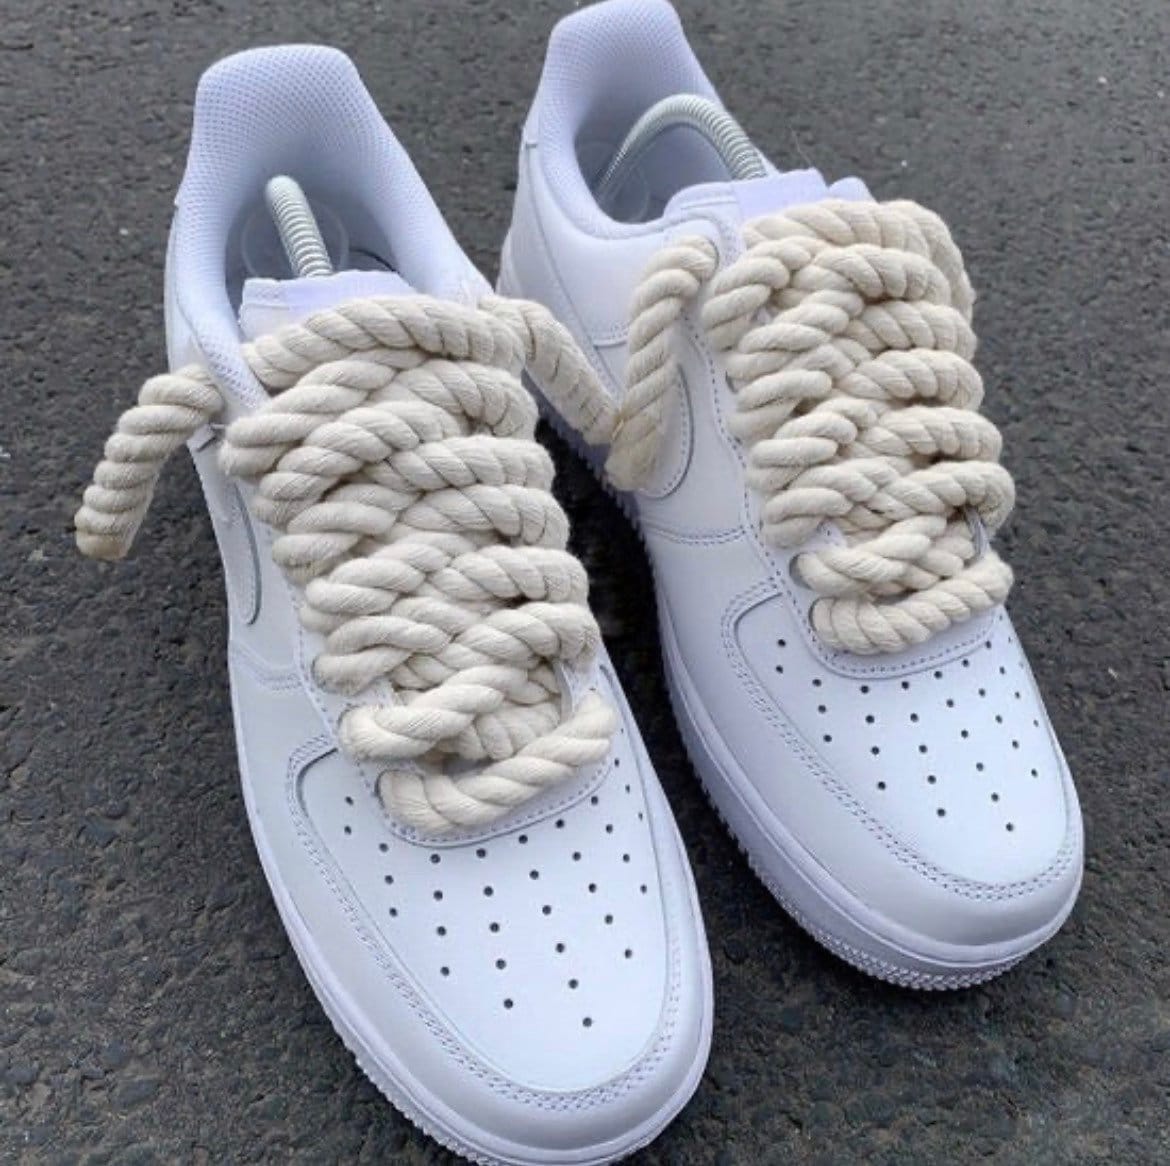 Custom Louis Vuitton Air Force ones￼ With rope laces￼ #custom